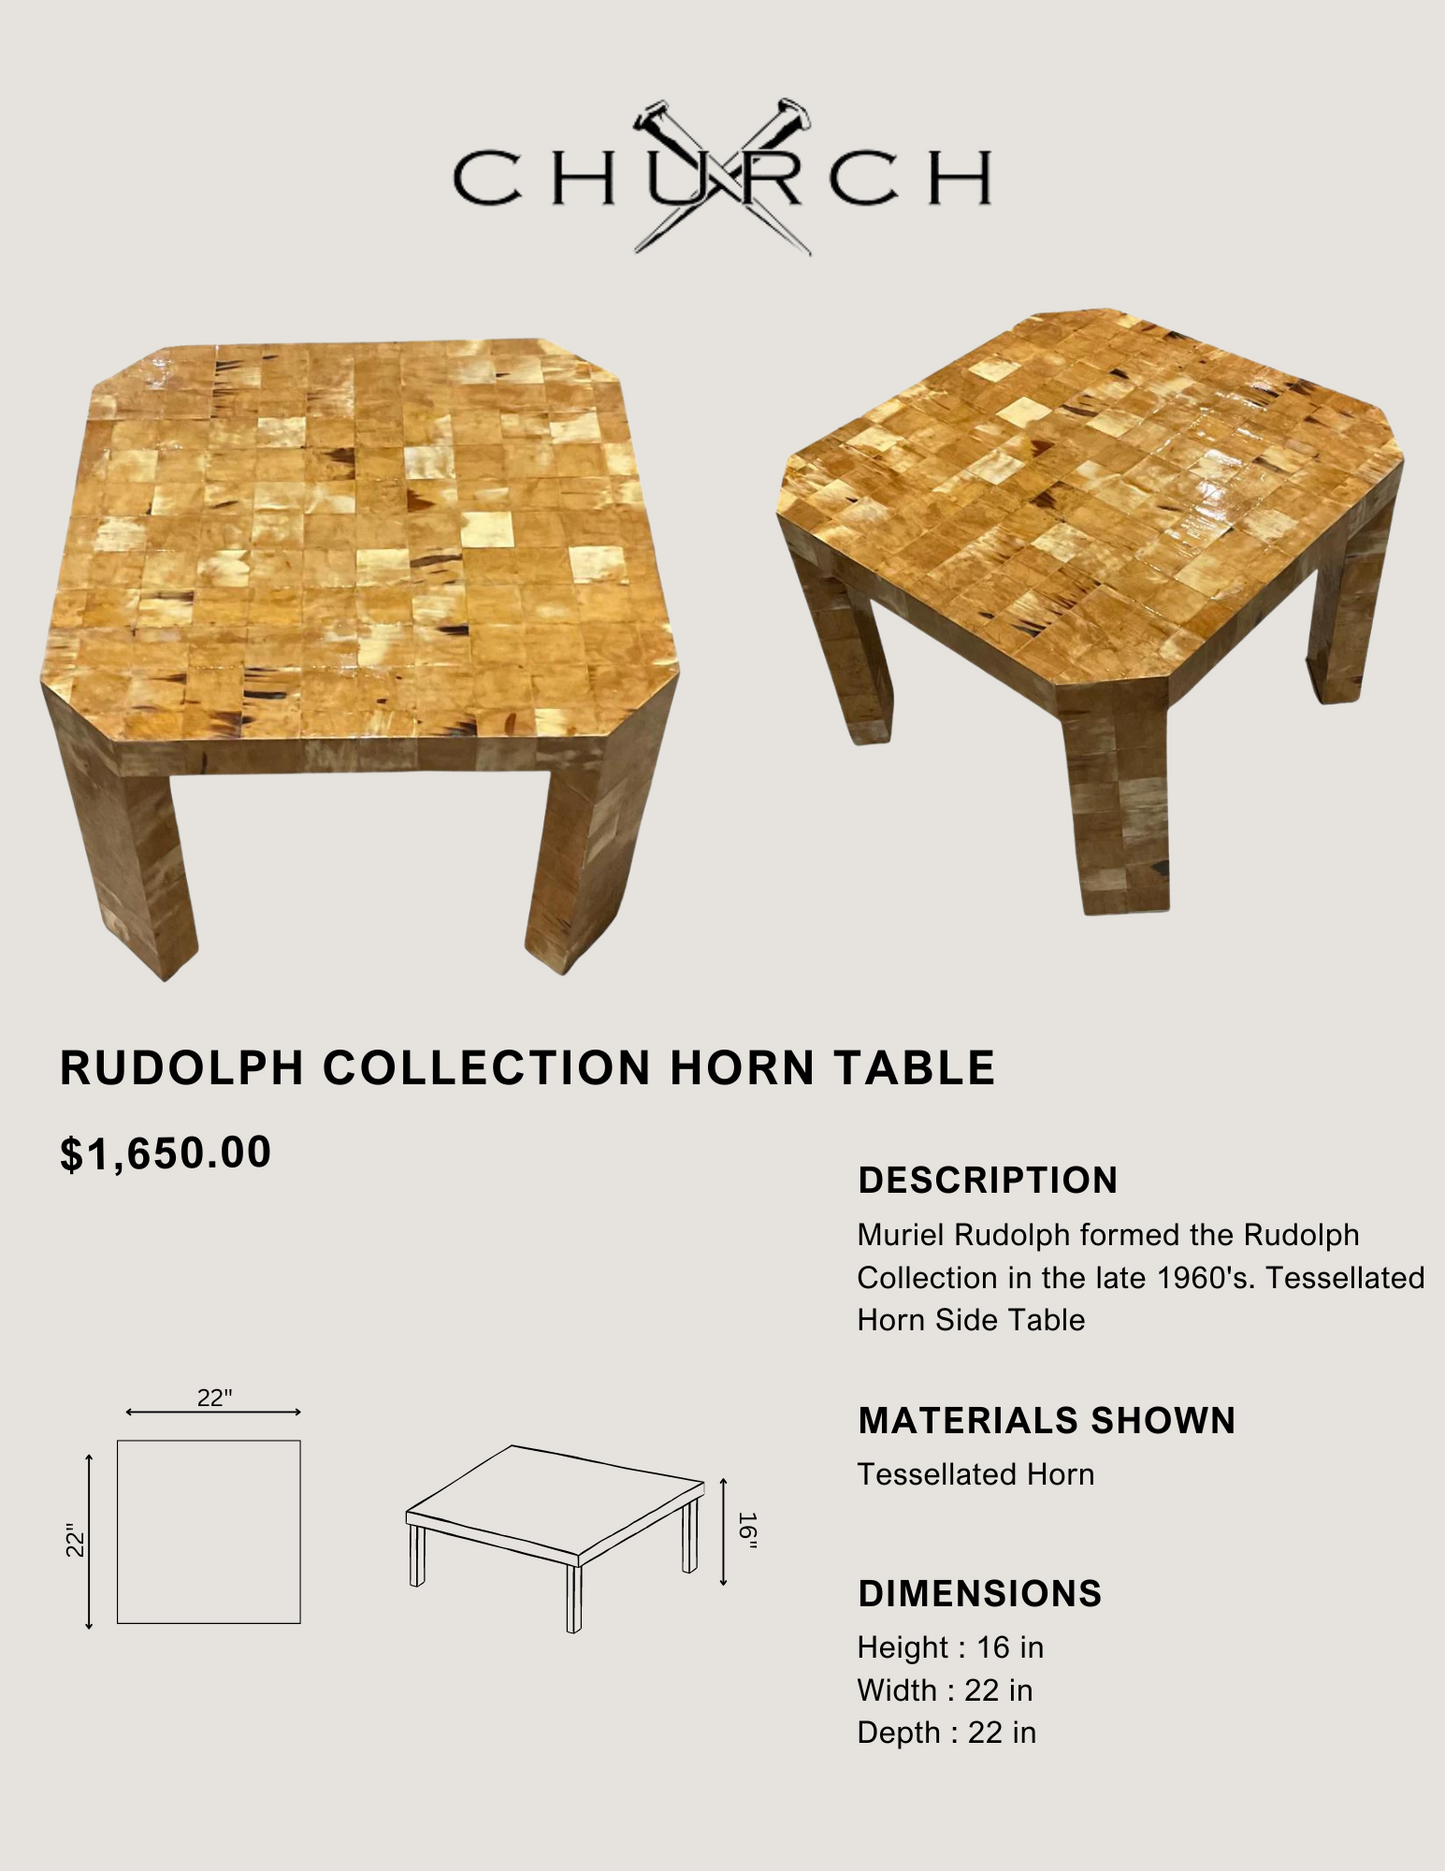 Rudolph Collection Horn Table